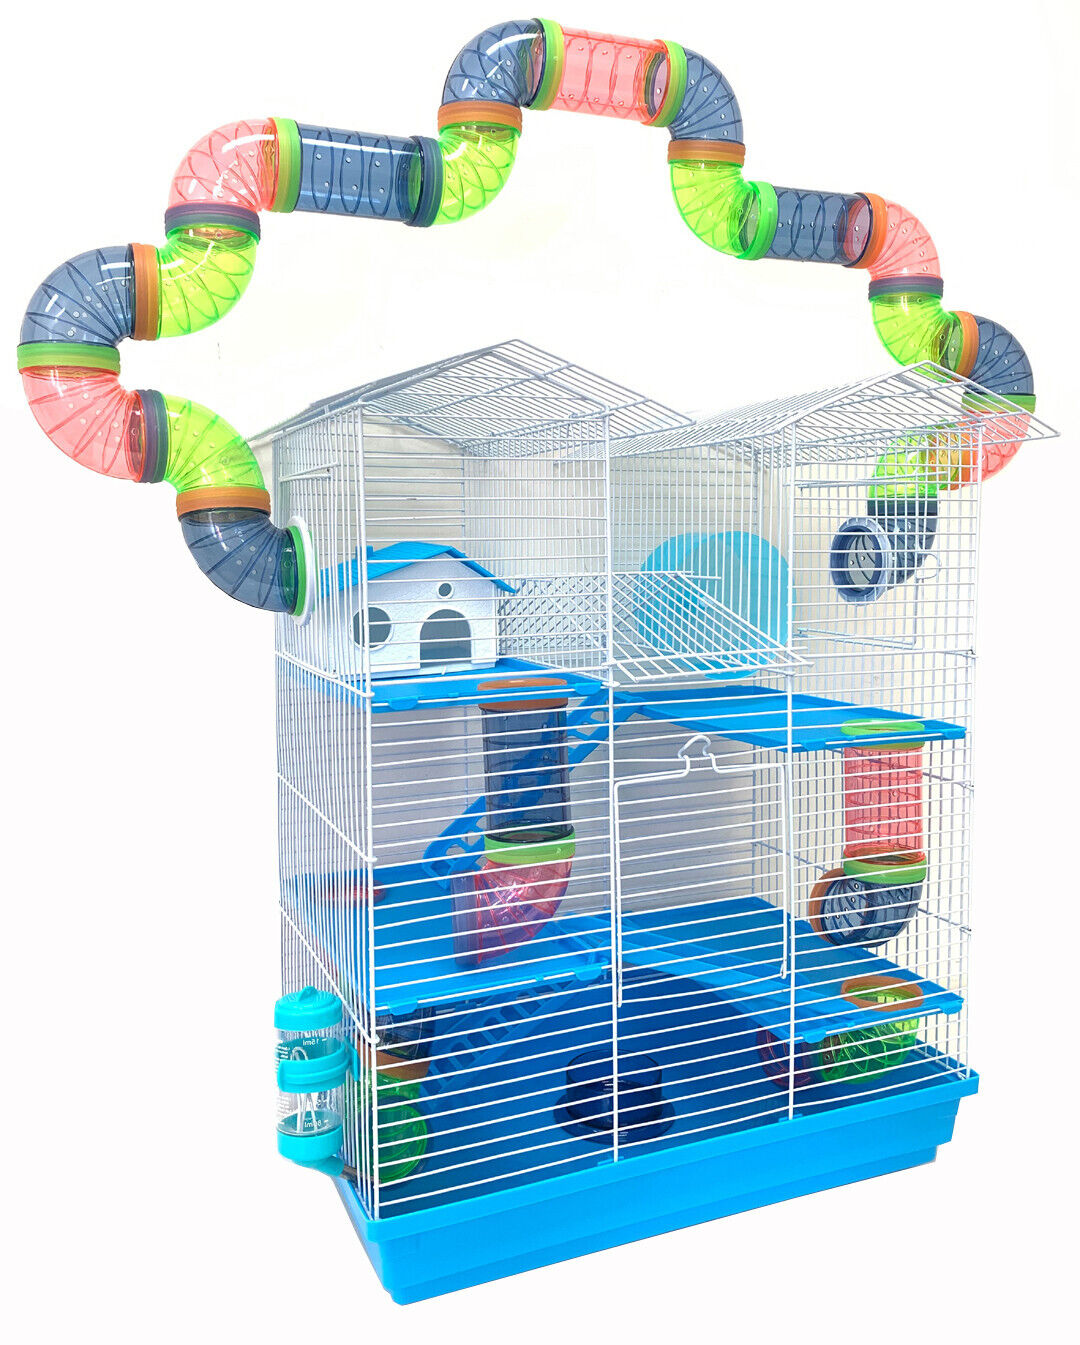 LARGE 5-Tiers Twin Towner Hamster Habitat Rodent Gerbil Mouse Mice Rats Cage